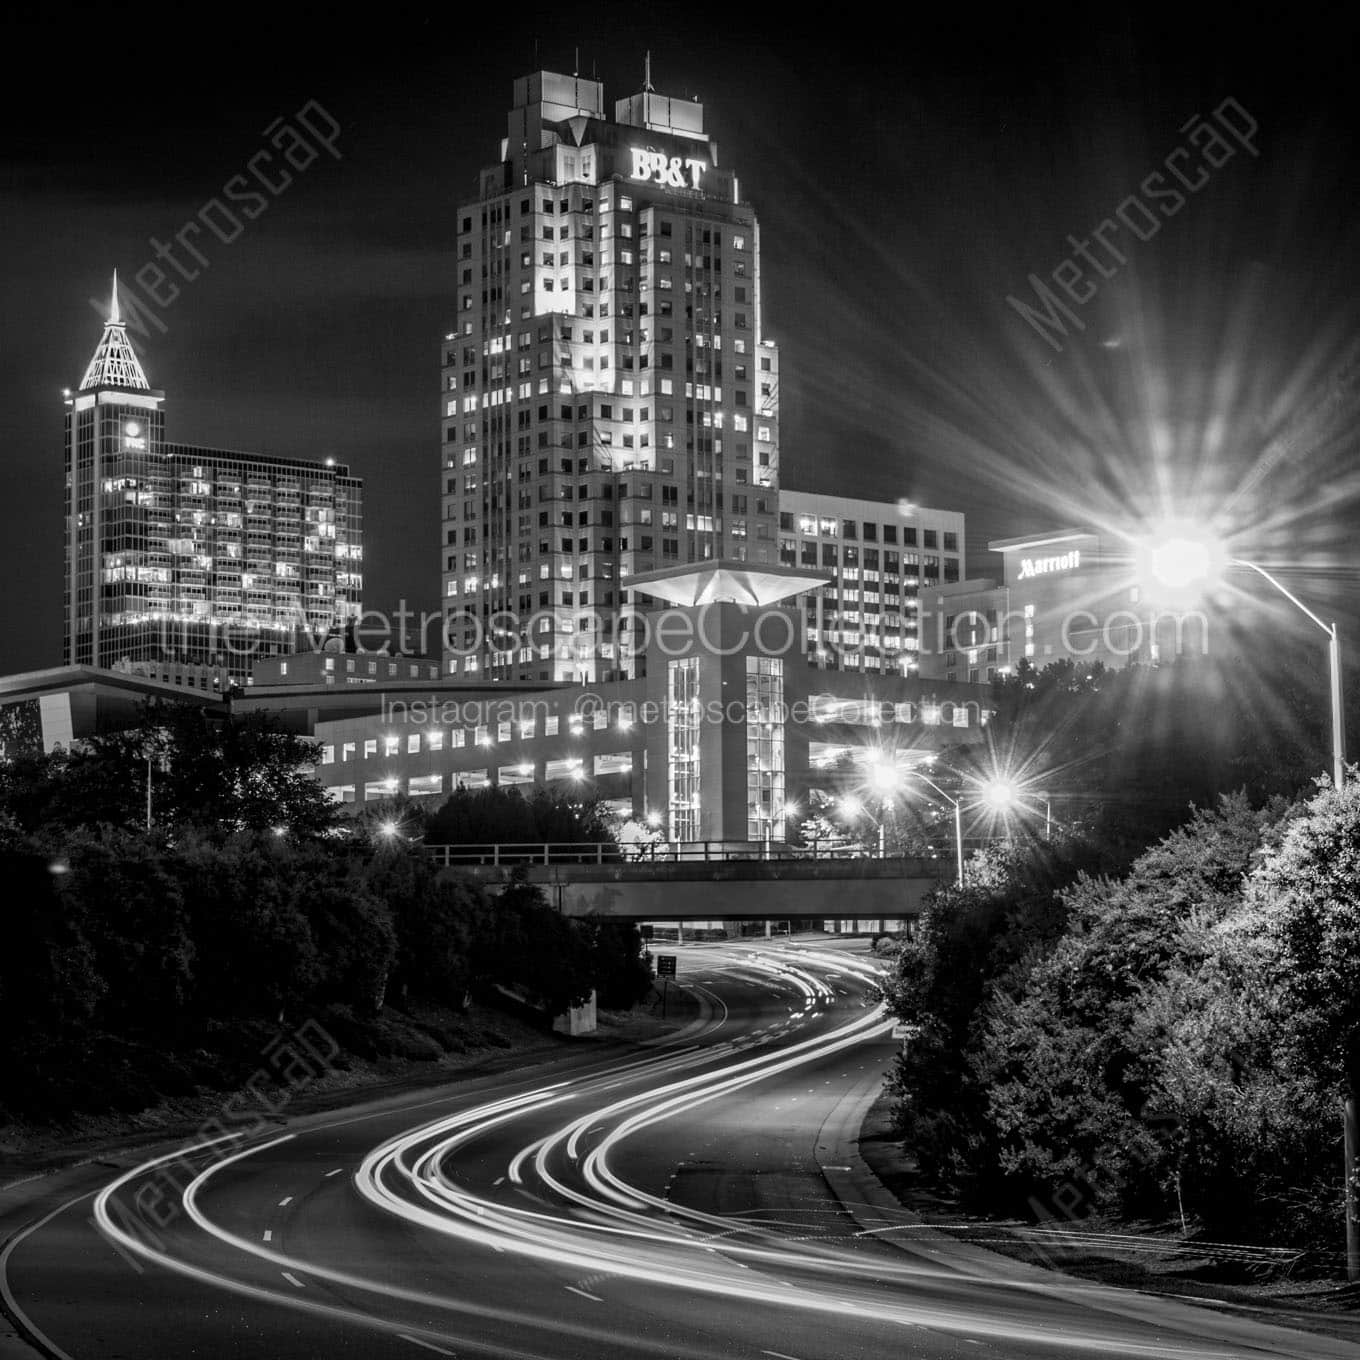 downtown raleigh nc skyline at night mcdowell Black & White Office Art